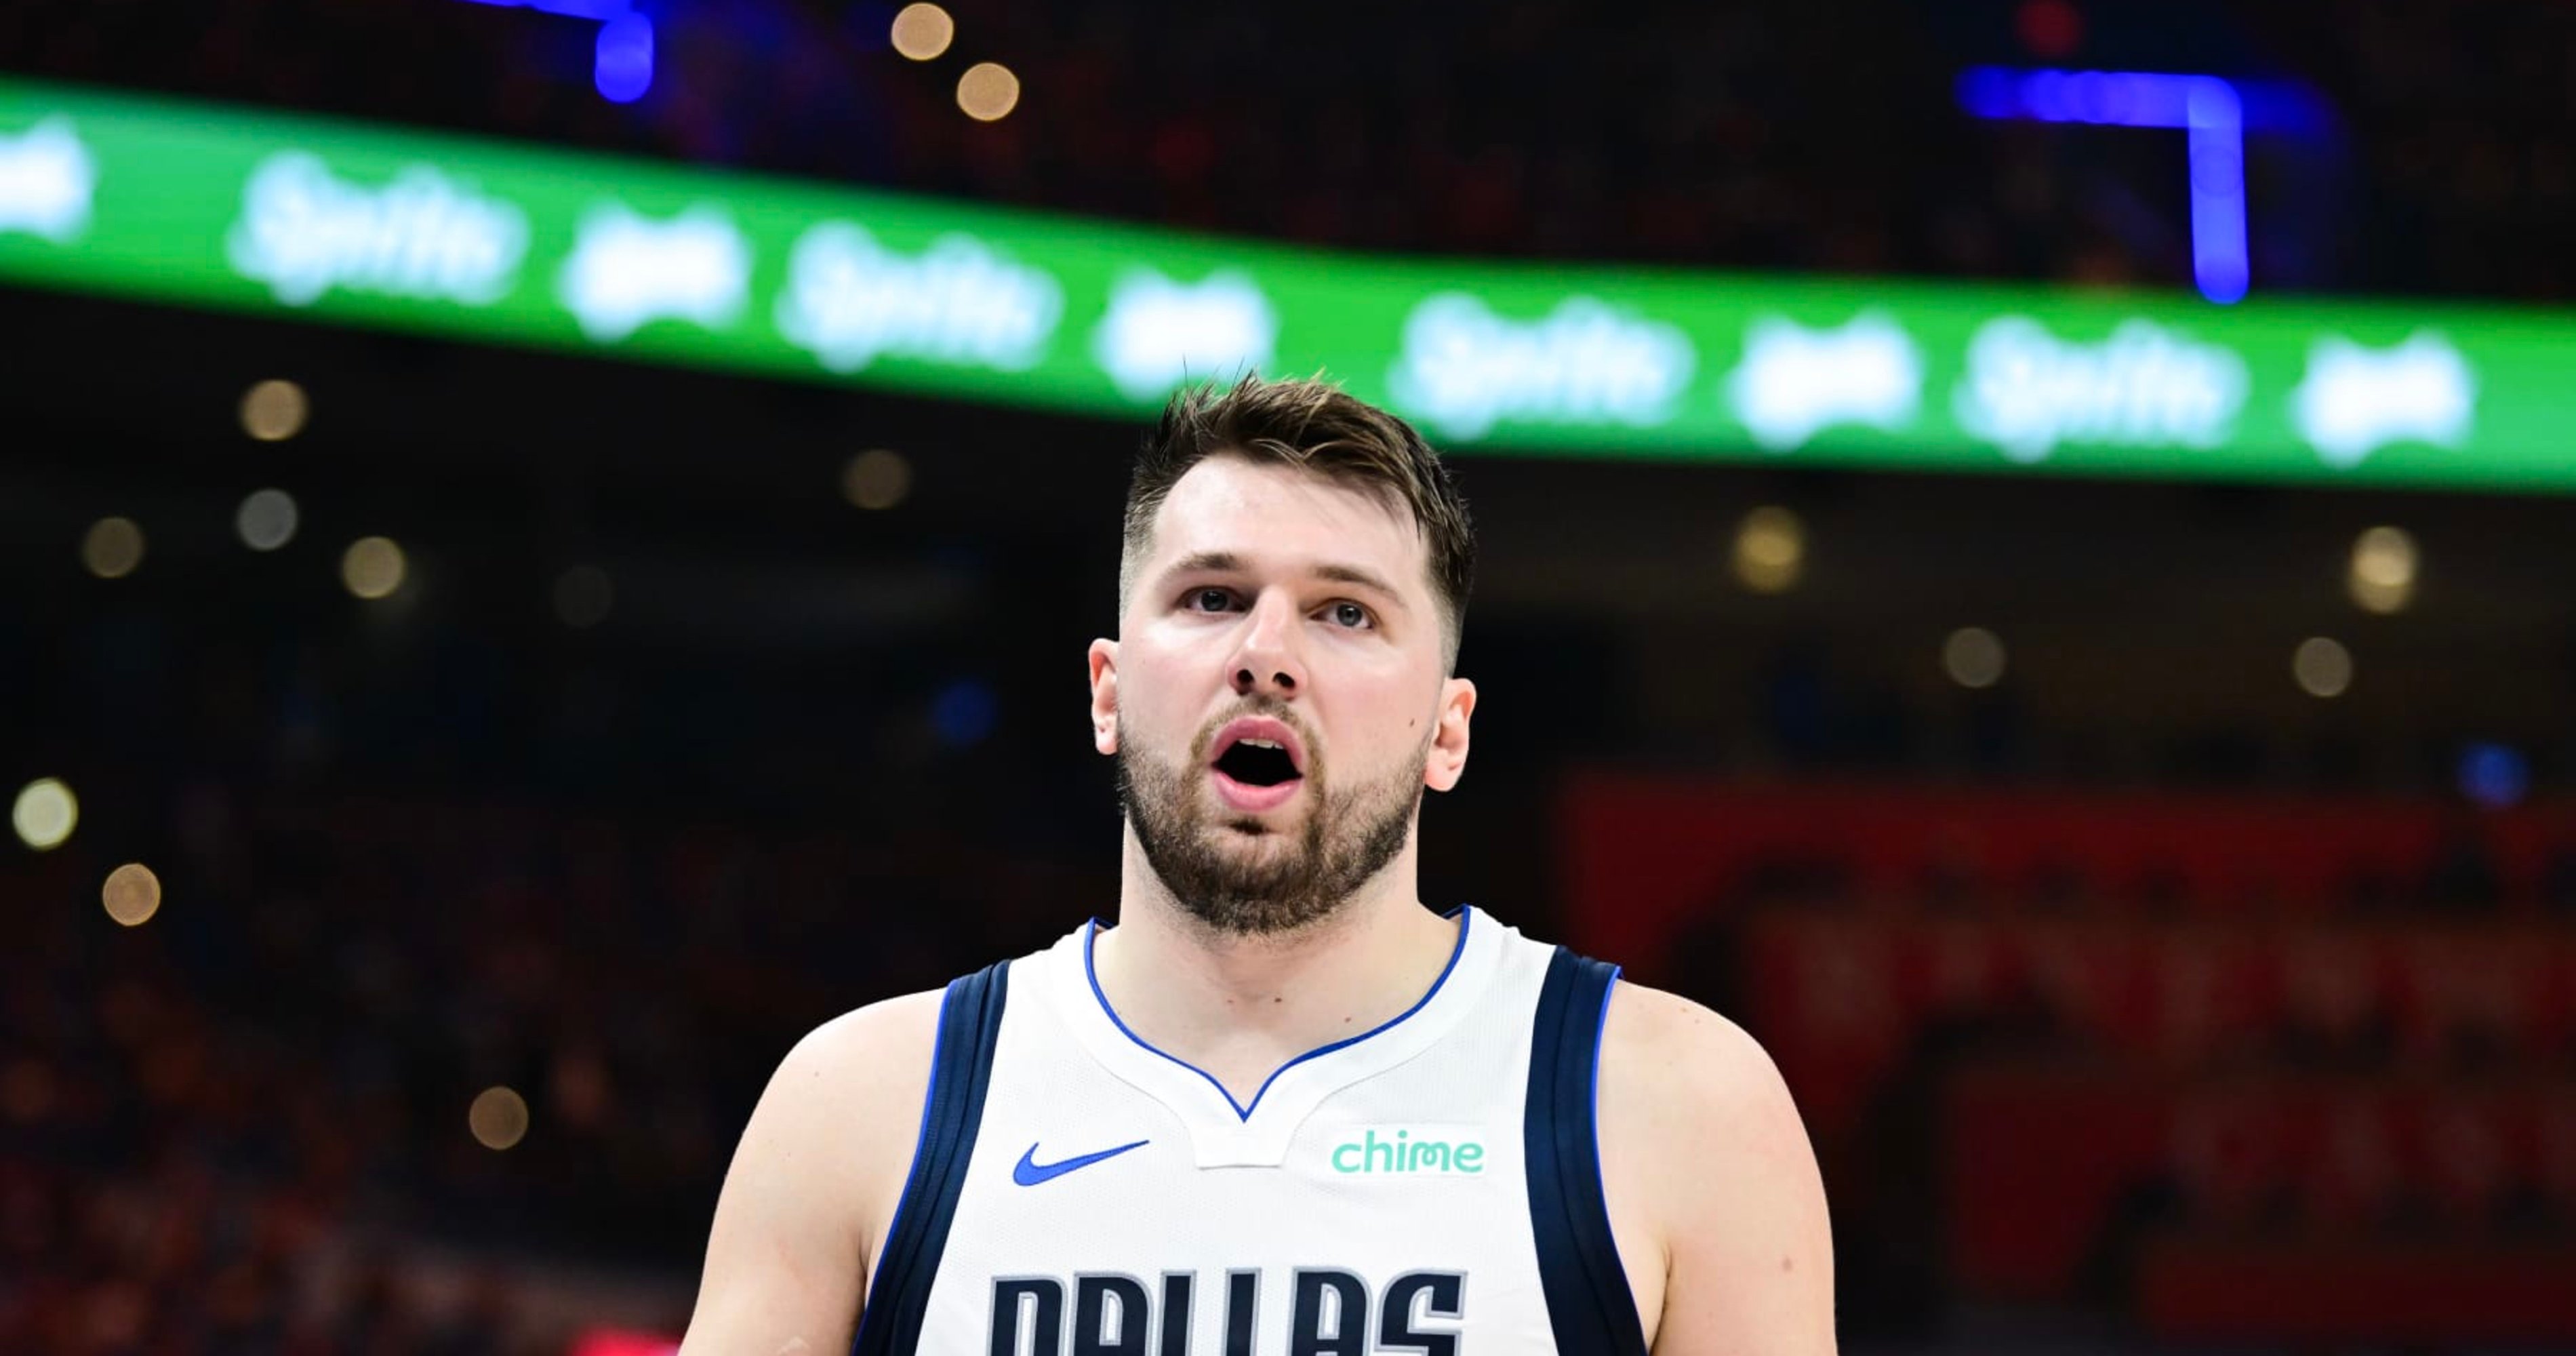 Video: Luka Dončić Reacts to 'Battling' Injuries at Mavs' Press Conference after Win